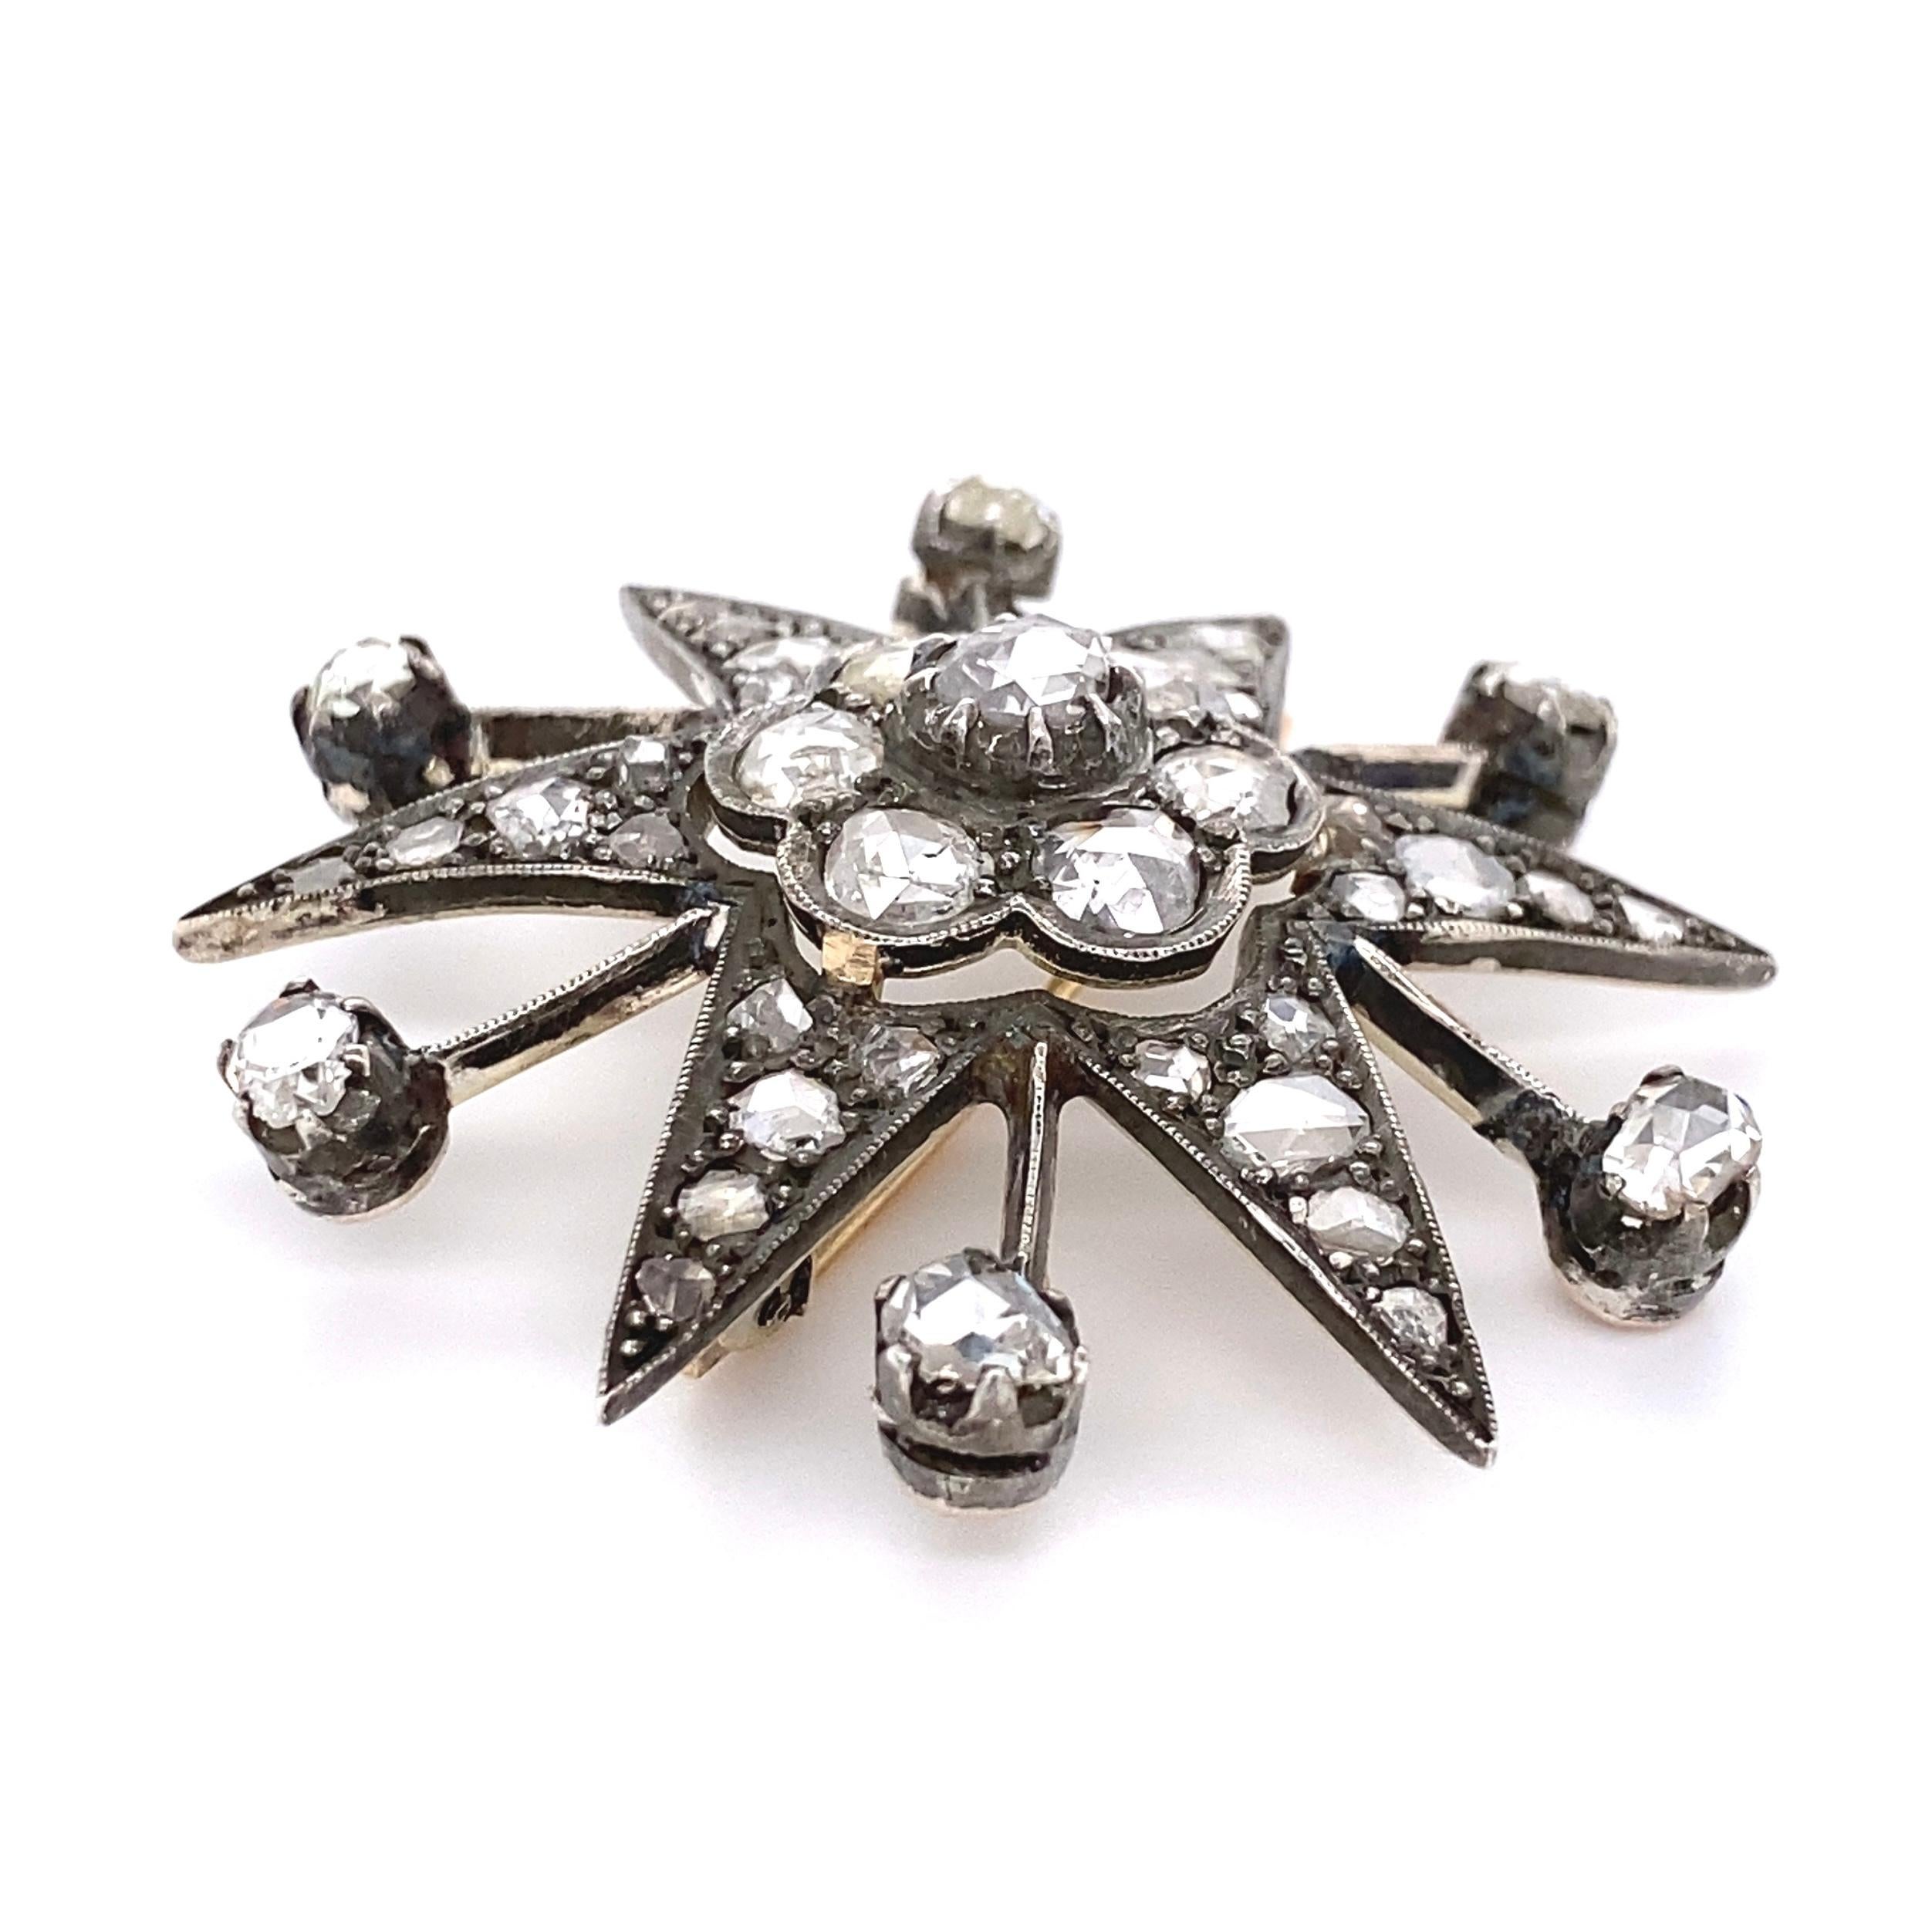 Beautiful Antique Heirloom Diamond Star Brooch Pendant. Beautifully hand crafted in Silver on Gold. Hand set with 43 Old European Cut Diamonds, approx. 4.50tcw. Measuring approx. 1.81” wide x 0.56” deep. A great acquisition for lovers of quality